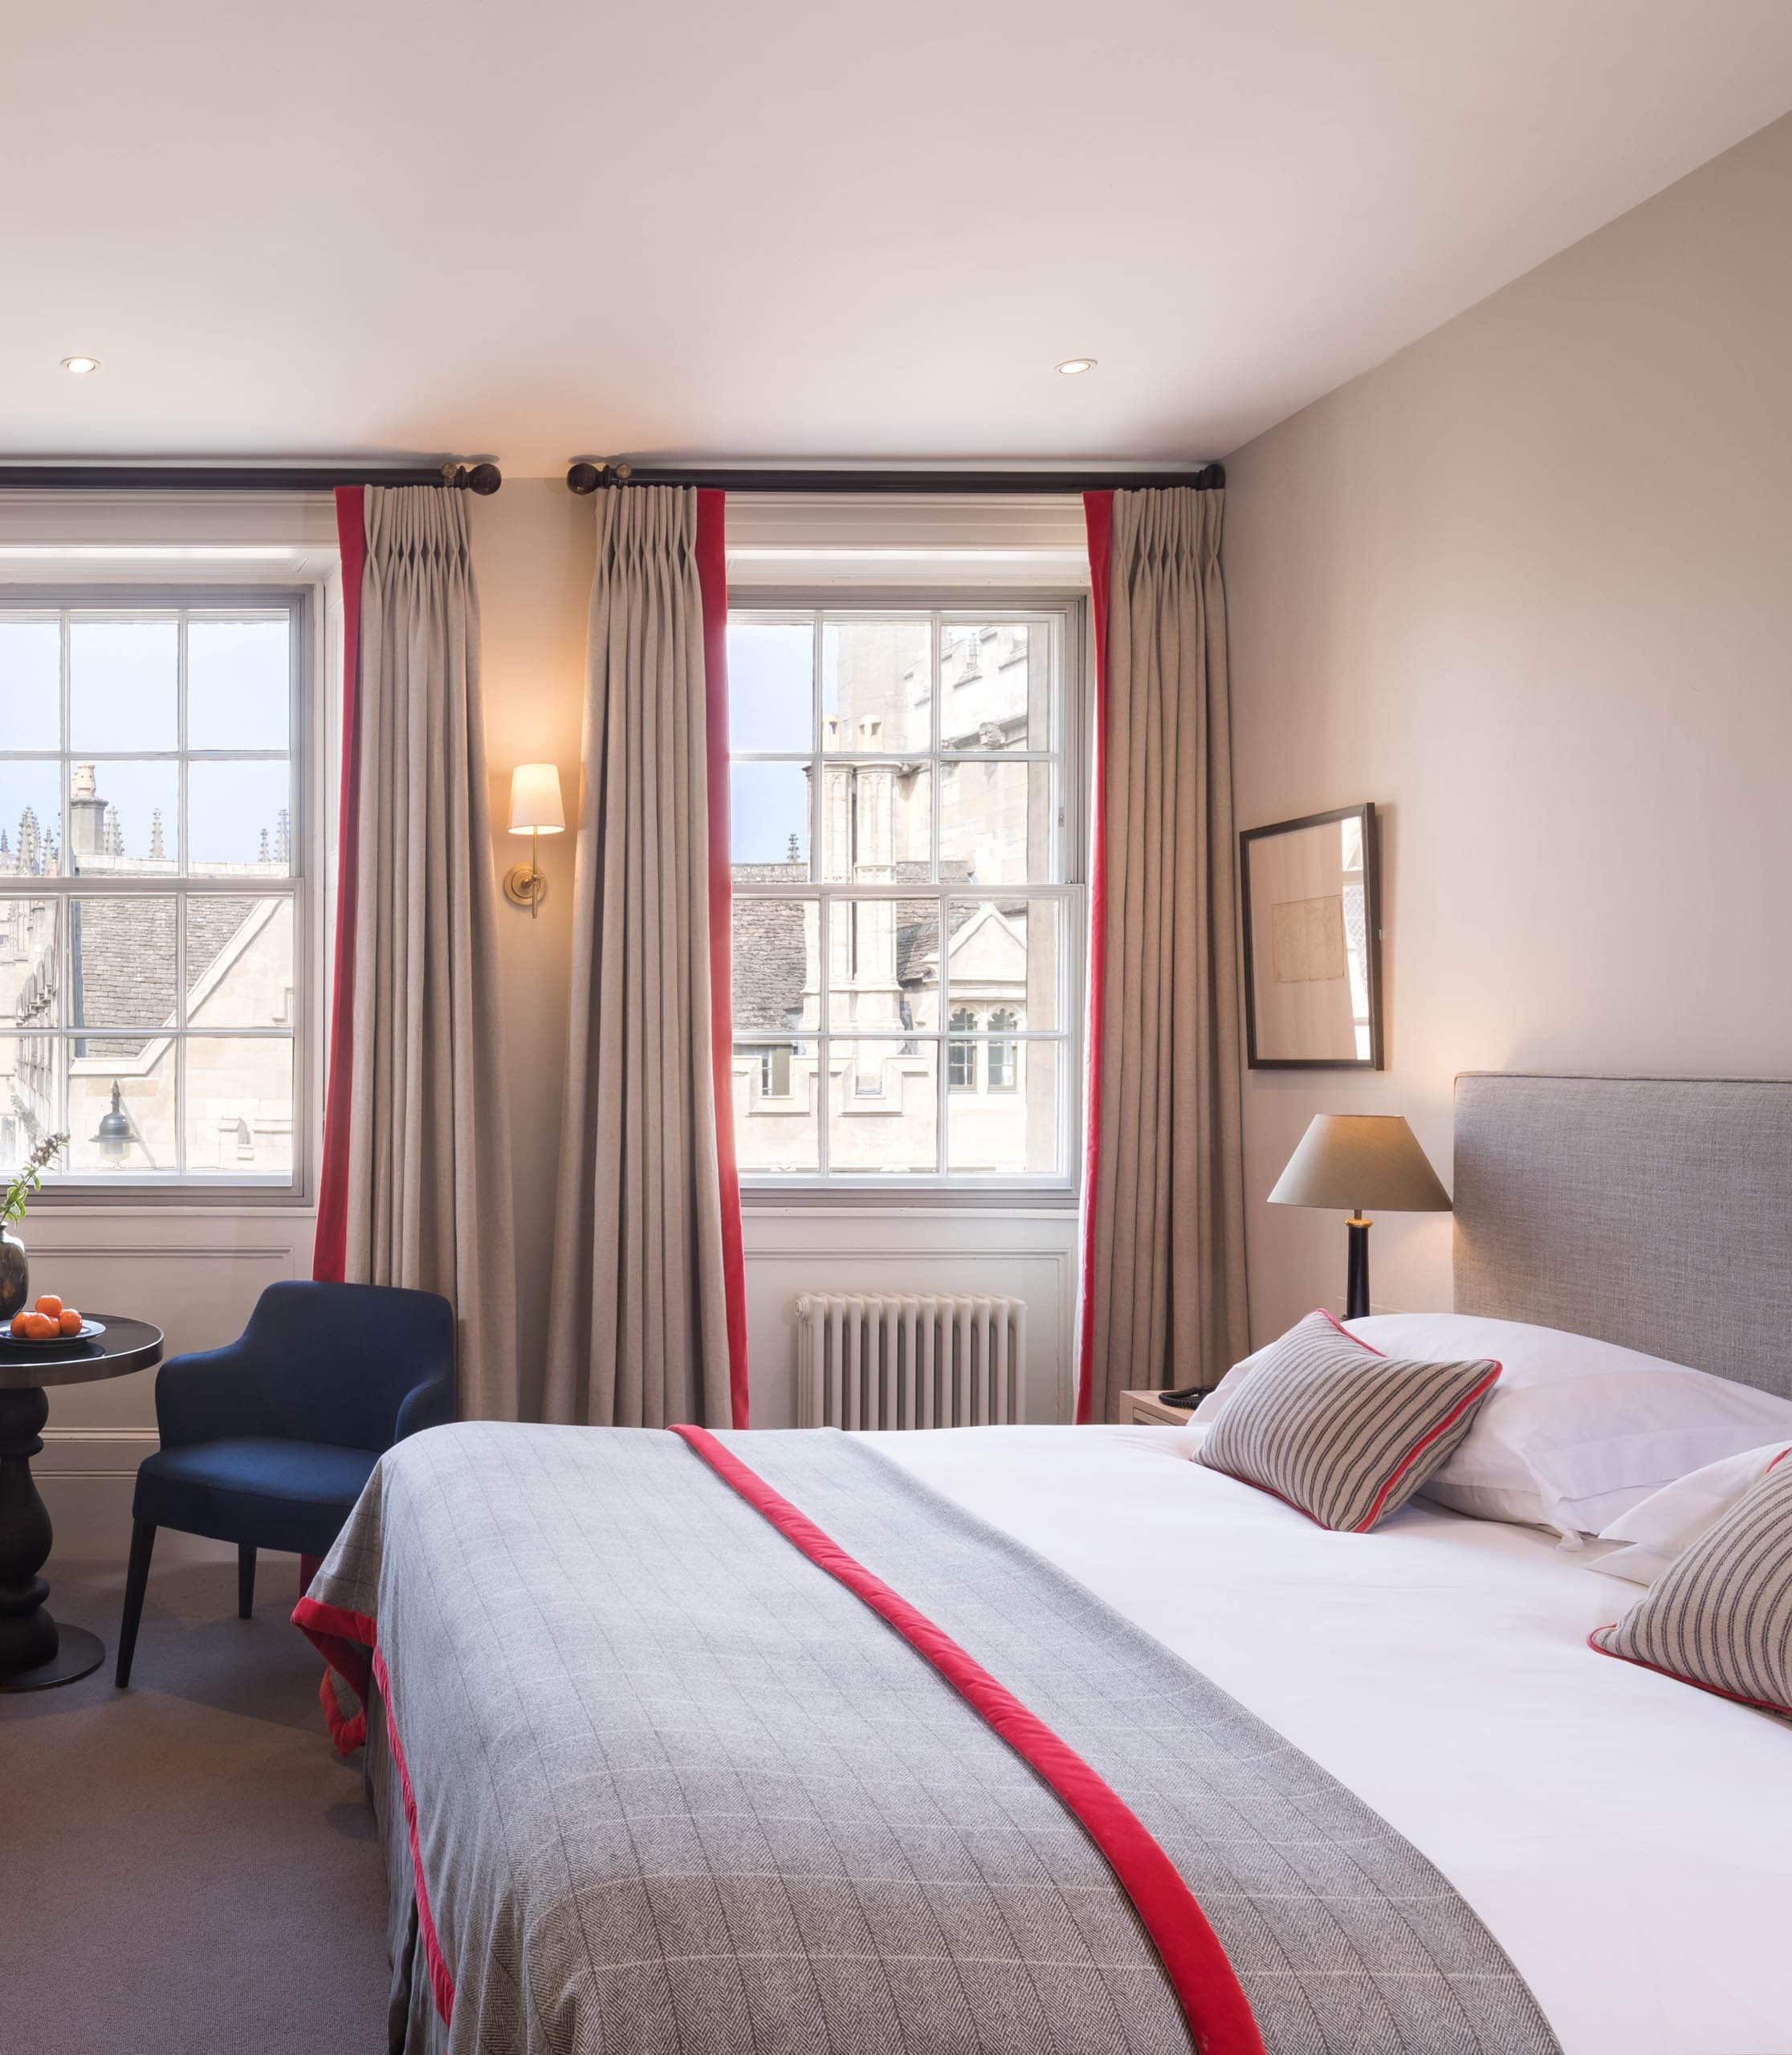 0002-2019-Old-Bank-Hotel-Oxford-High-Res-Bedroom-Modern-Windows-High-Street-View-Web-Hero-aspect-ratio-2232-2559